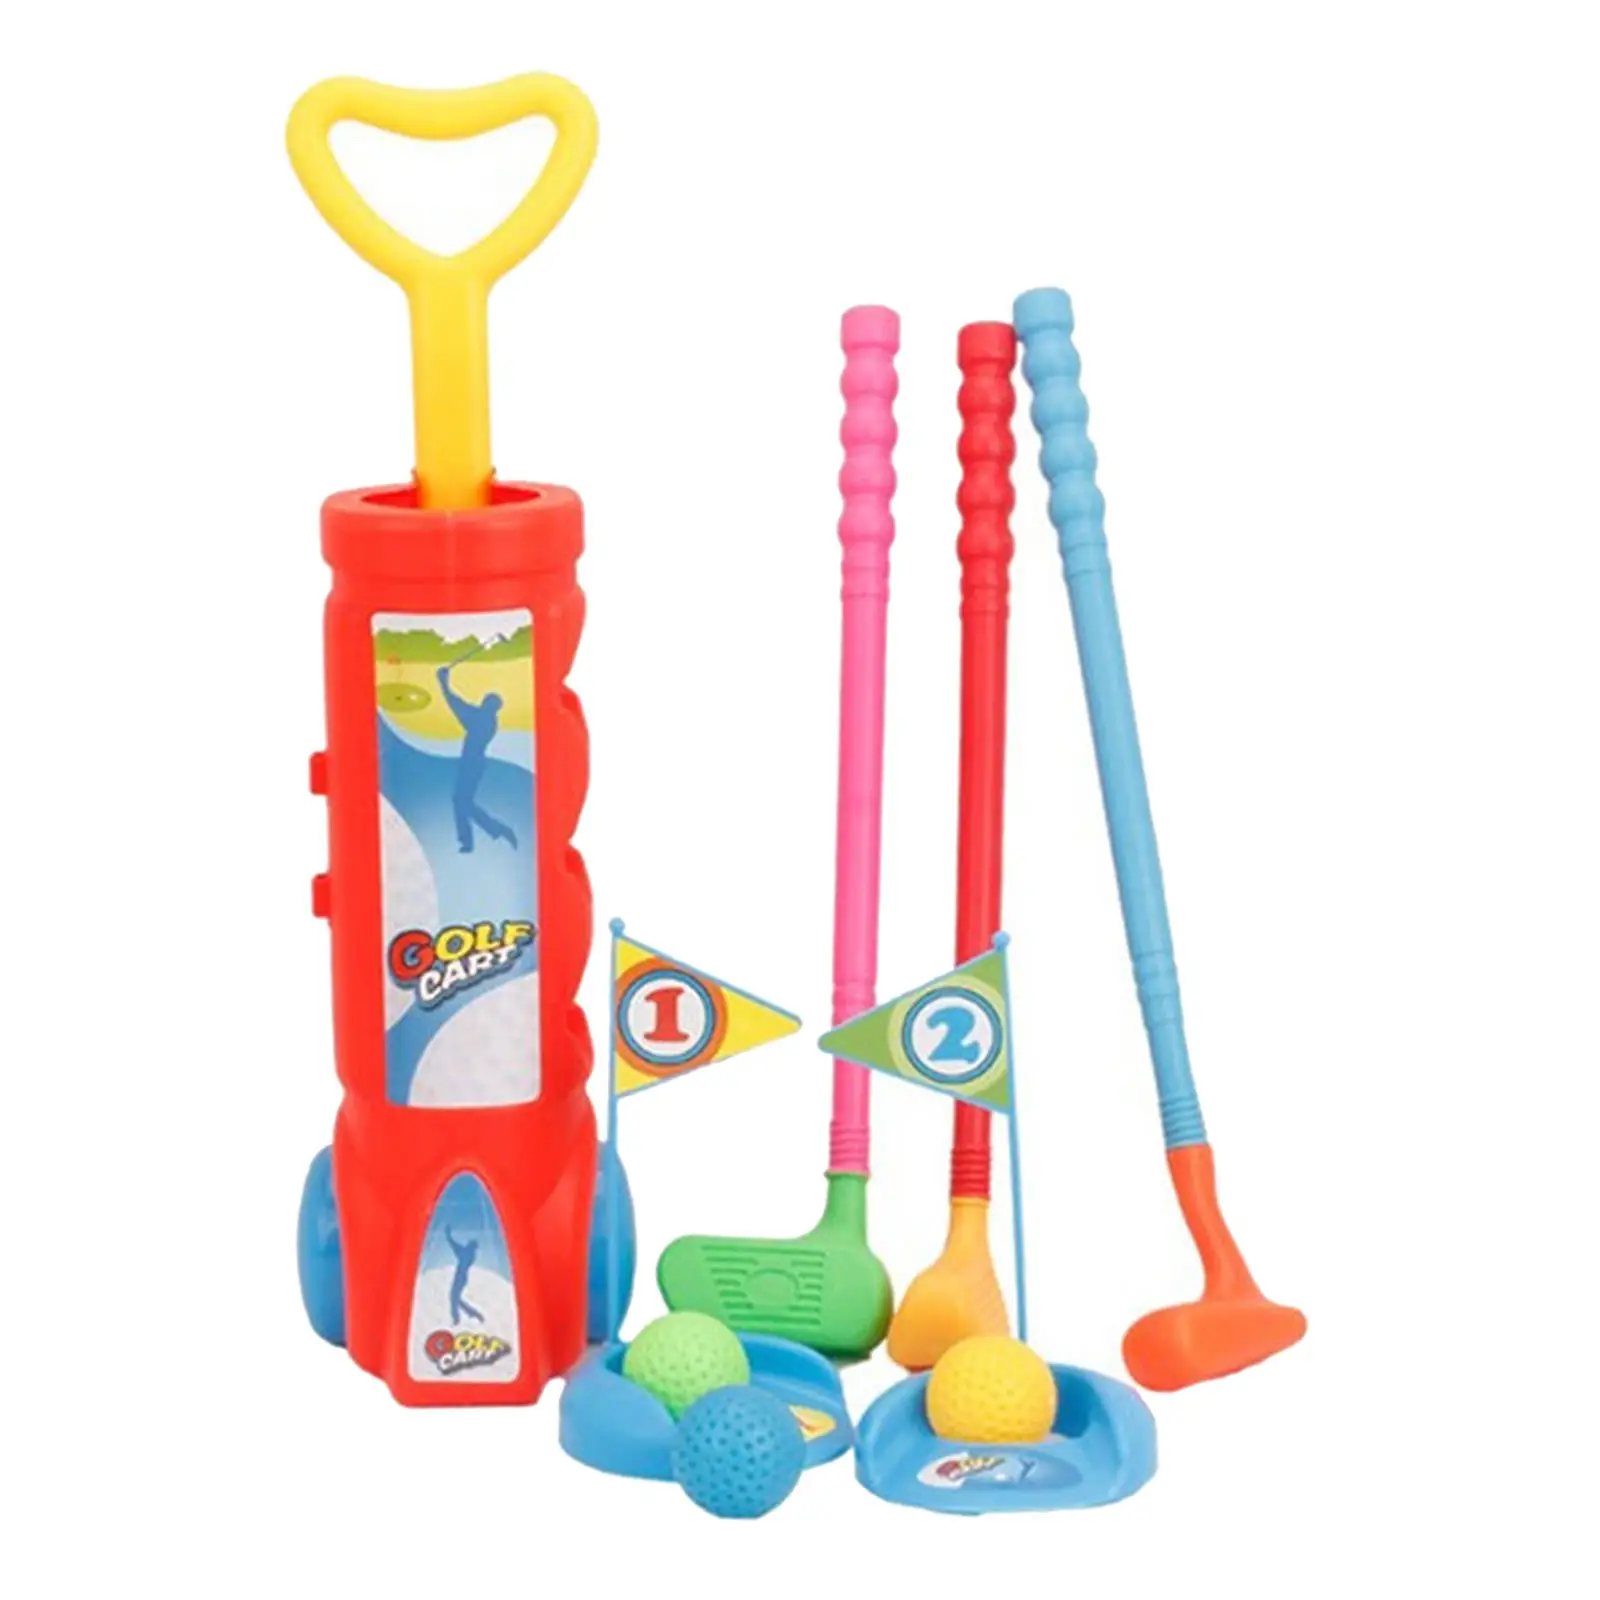 Non-toxic Golfer Mini Set Ball Game Kit Golfs Training Kids Security Practice Toy Children Gifts Indoor Sports Equipment